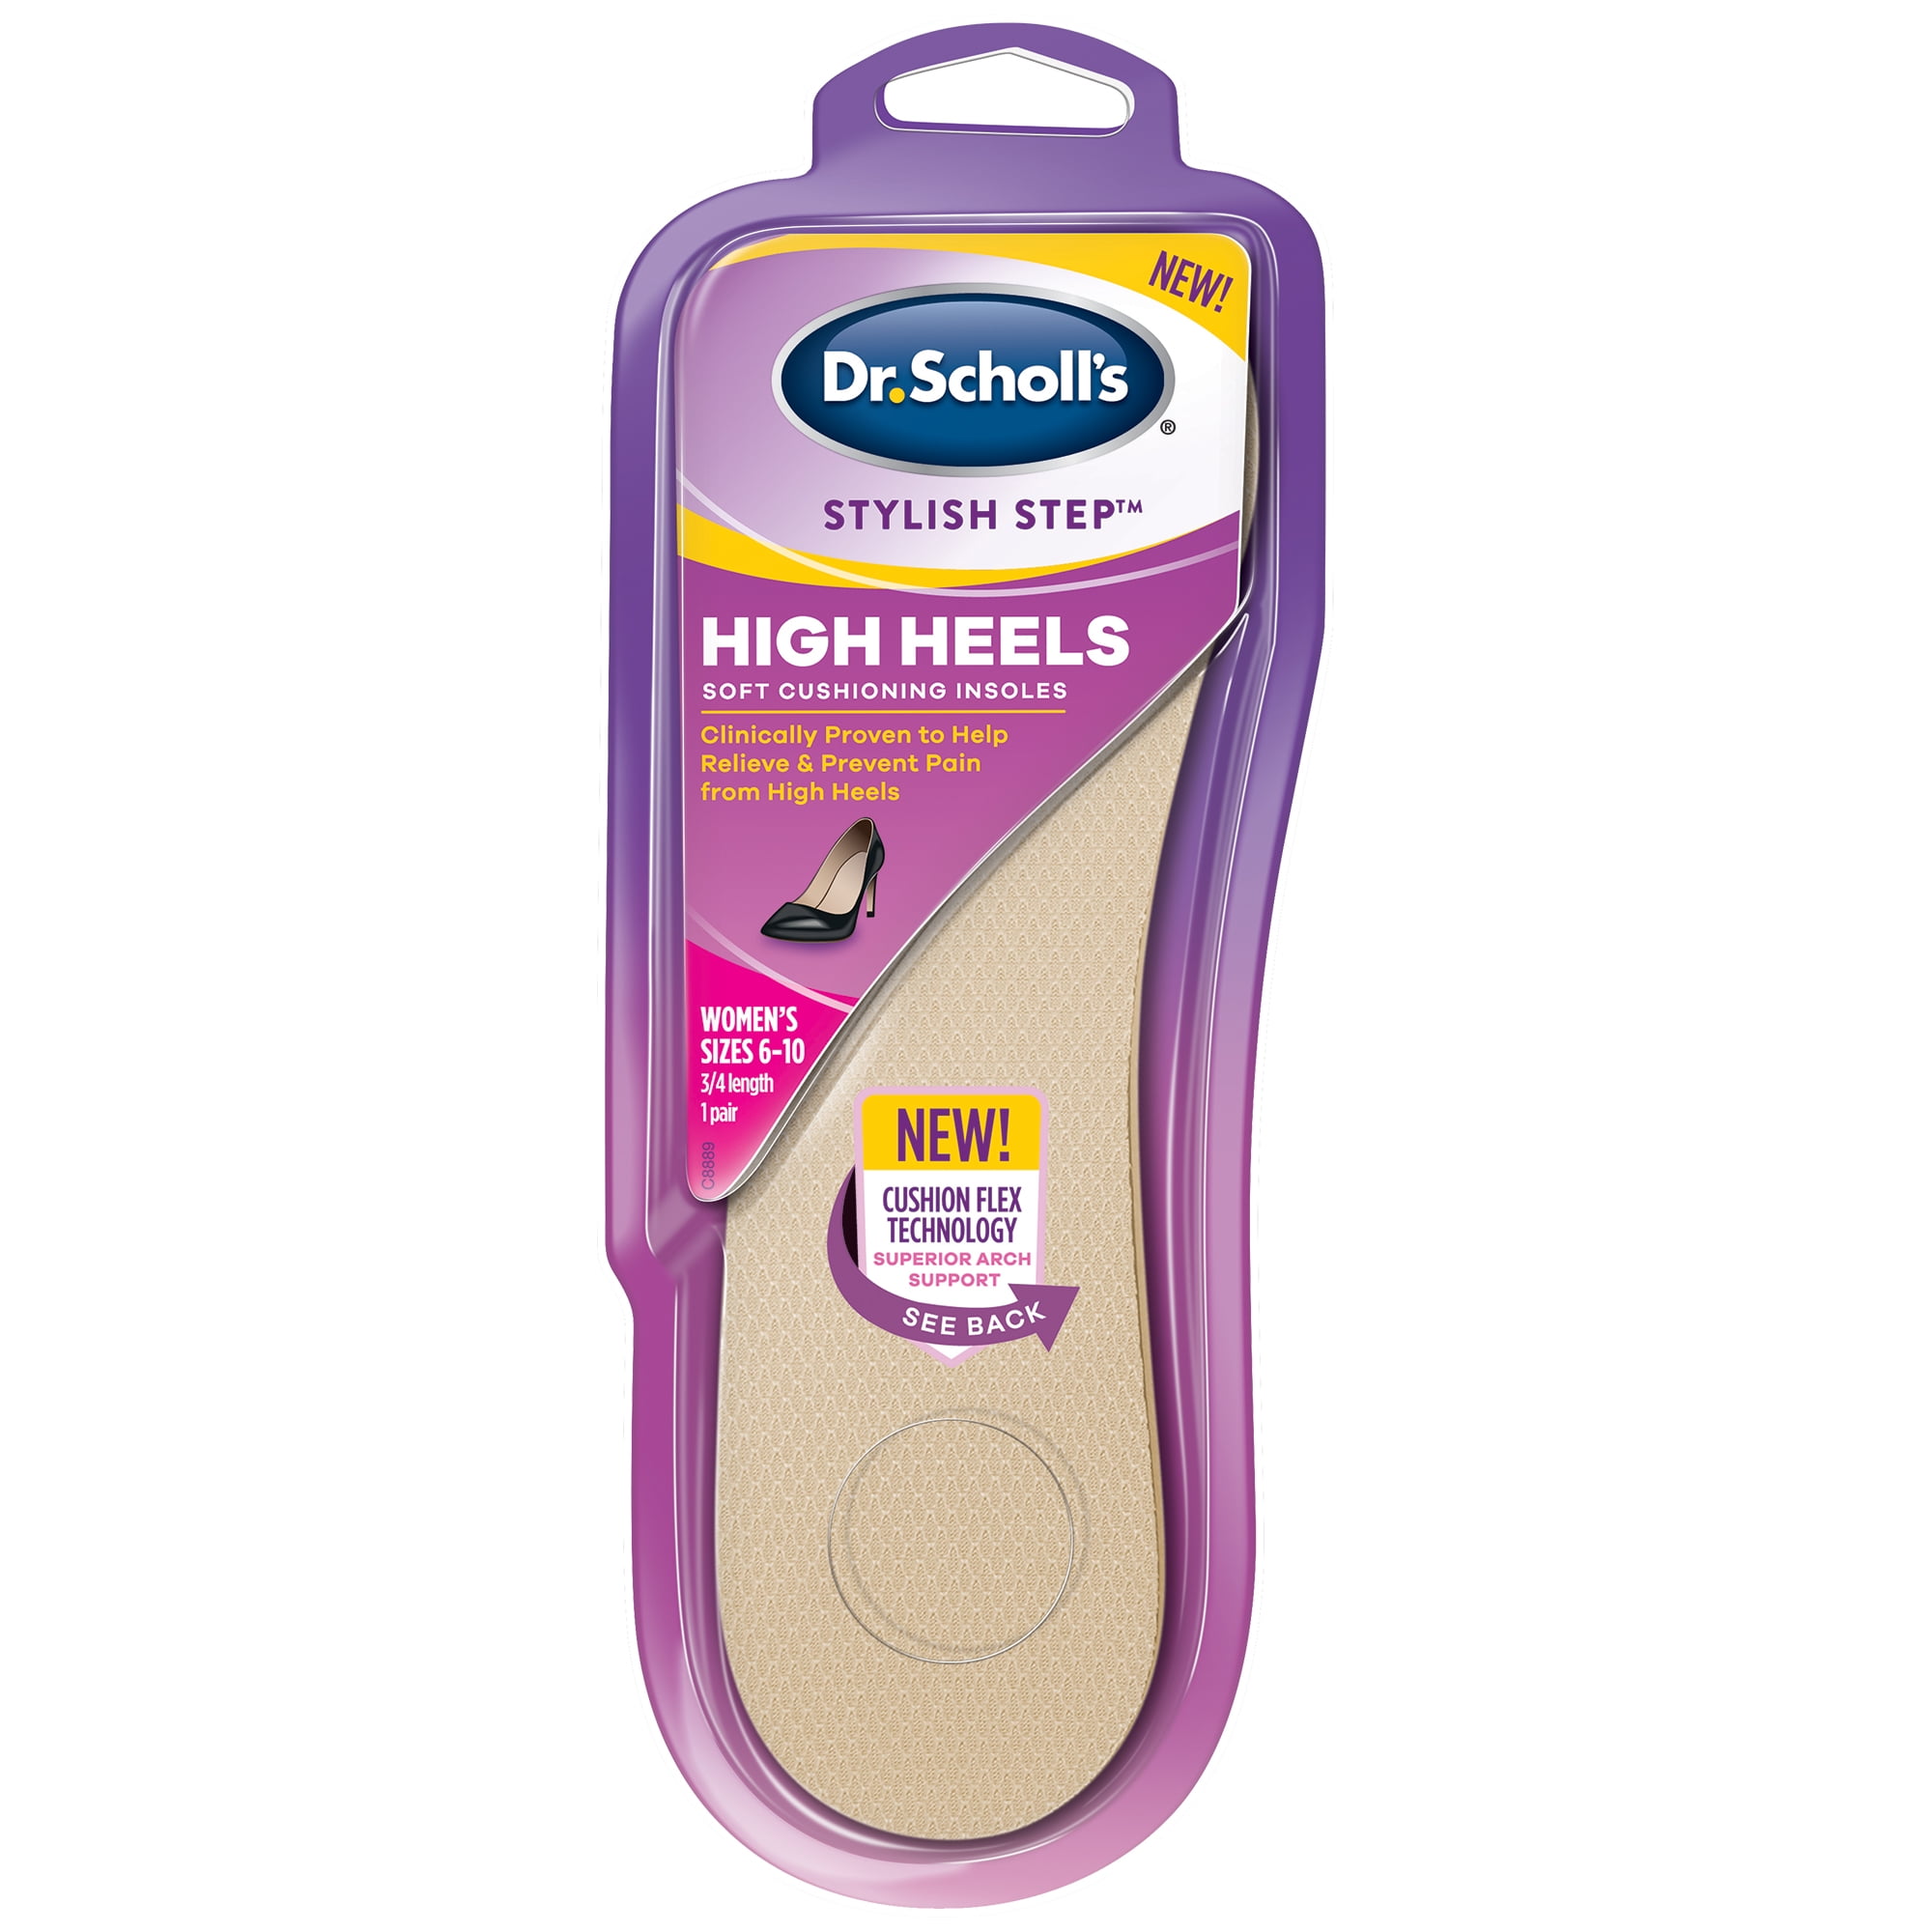 Dr. Scholl's Ball of Foot Cushions for High Heels (One Size) // Relieve and  Prevent Ball of Foot Pain with Discreet Cushions That Absorb Shock and Make High  Heels More Comfortable New